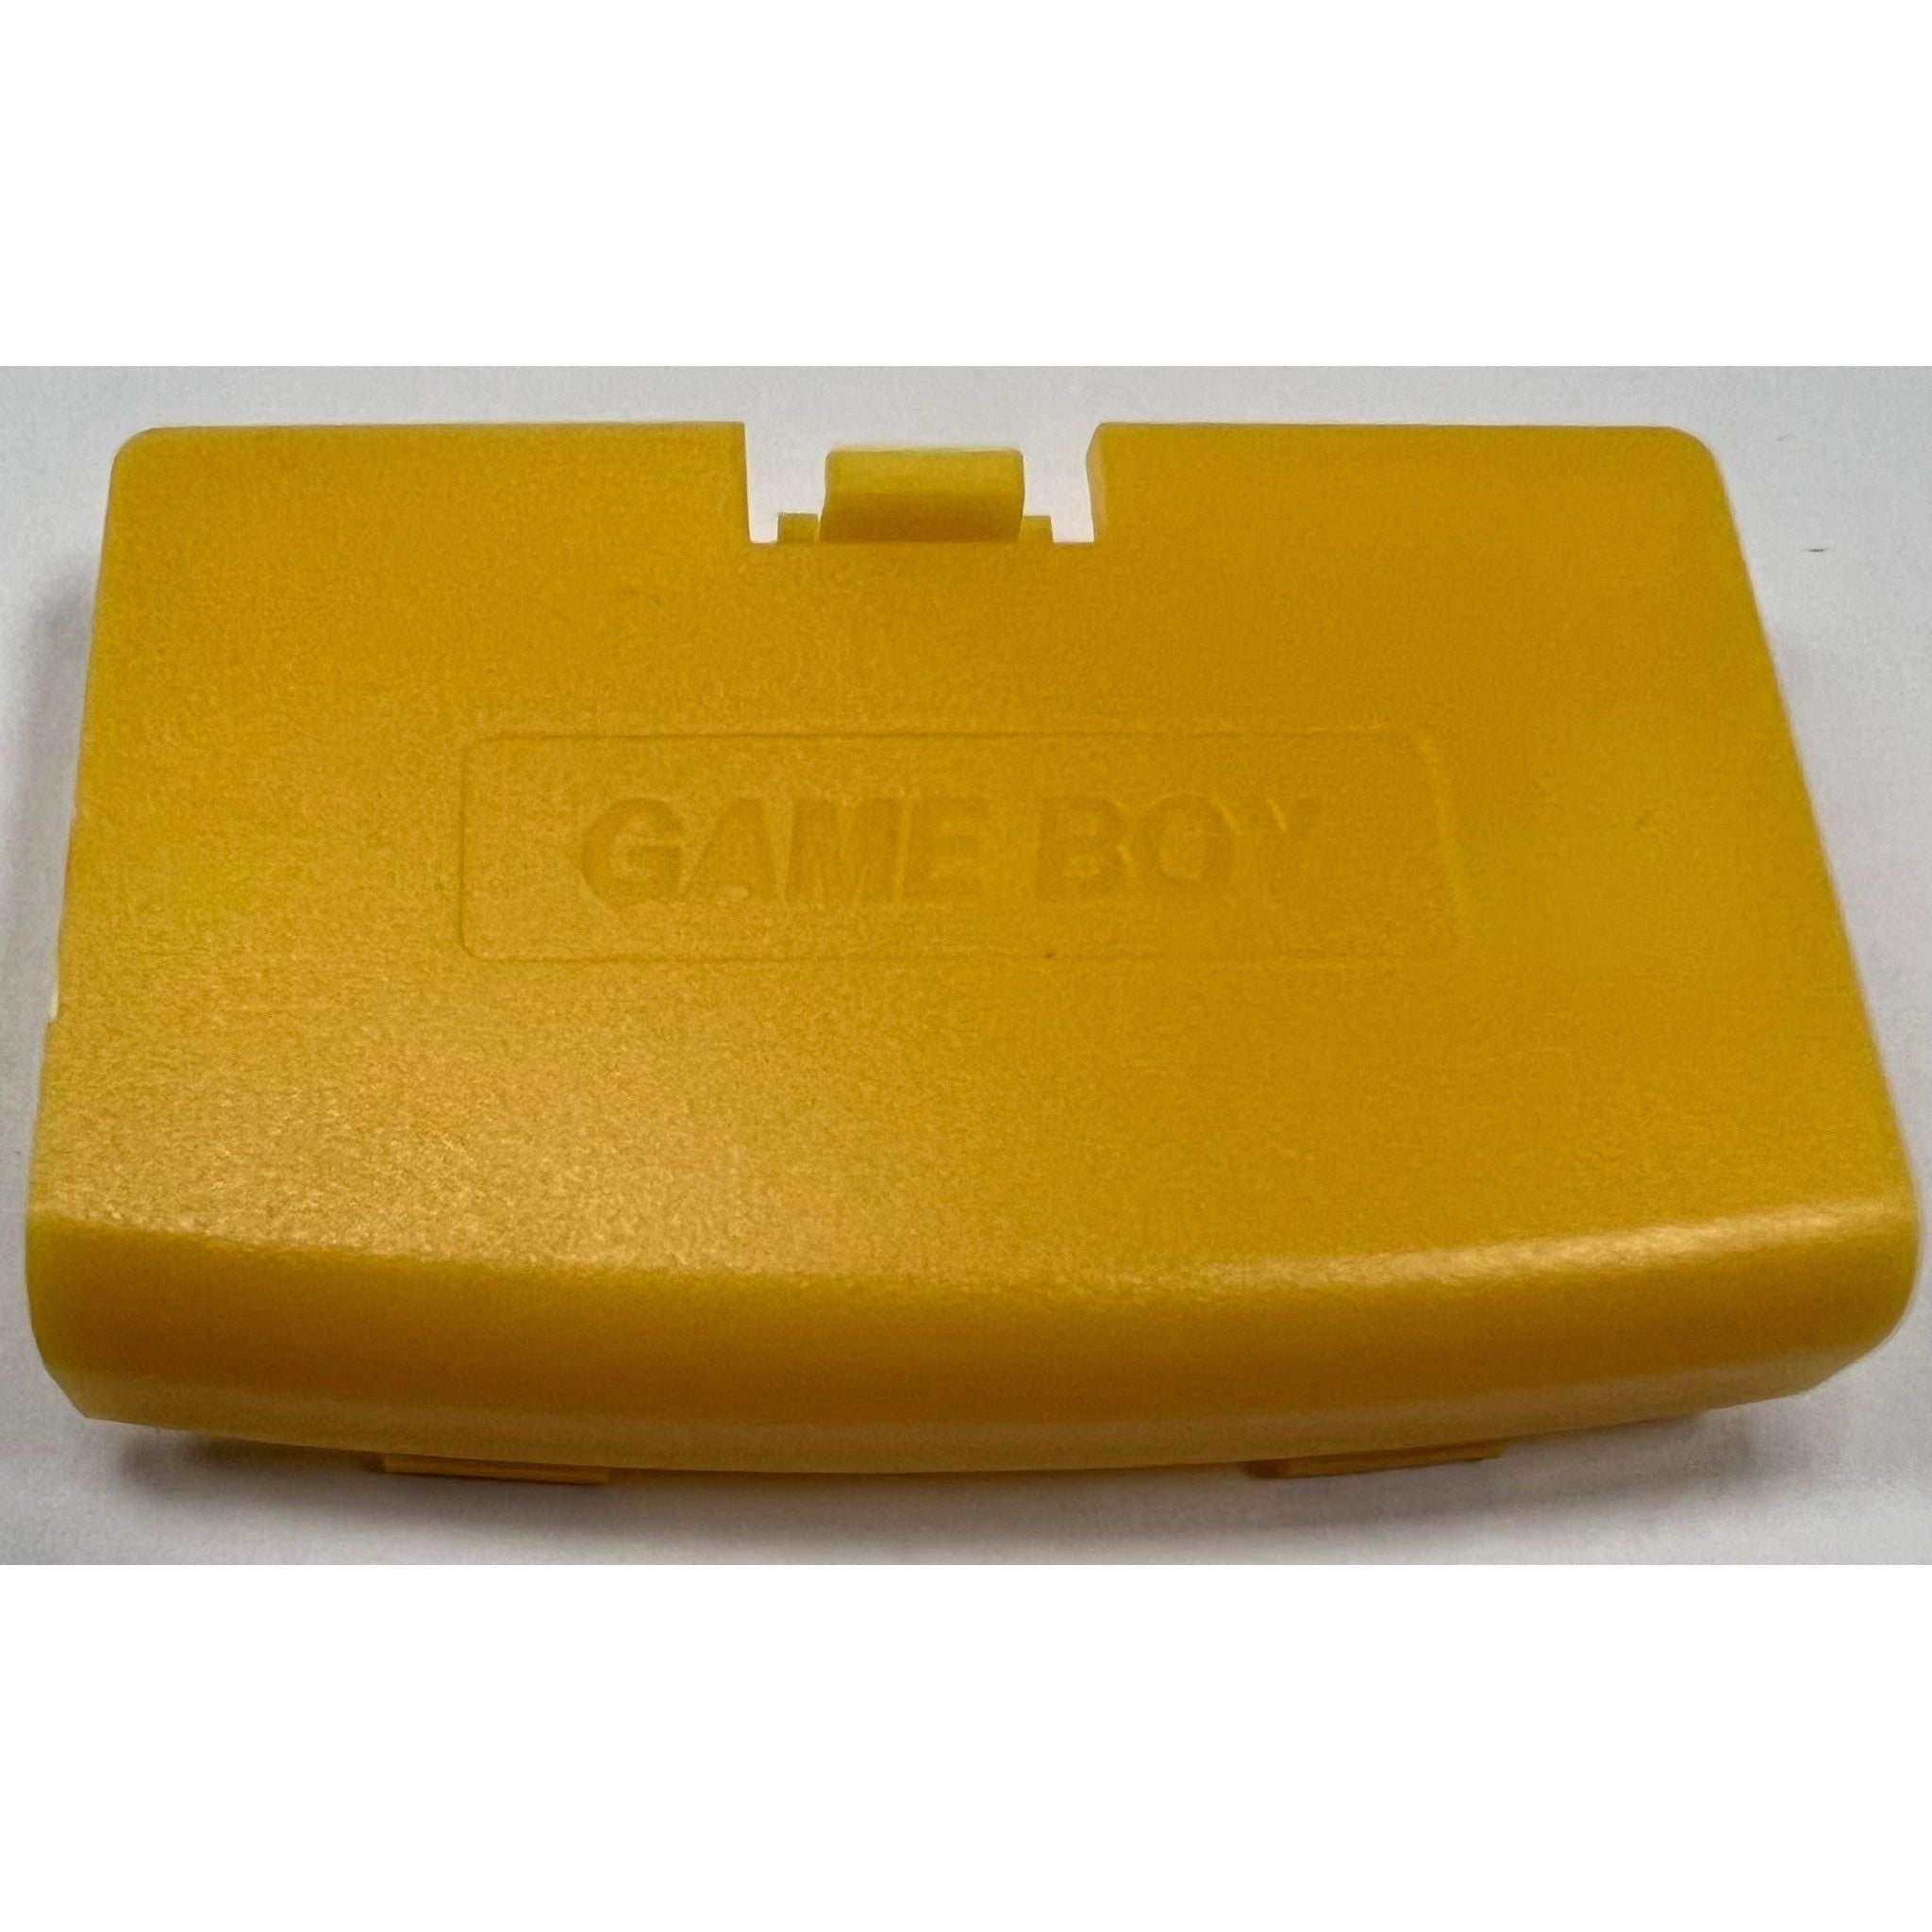 Gameboy Advance Replacement Battery Cover